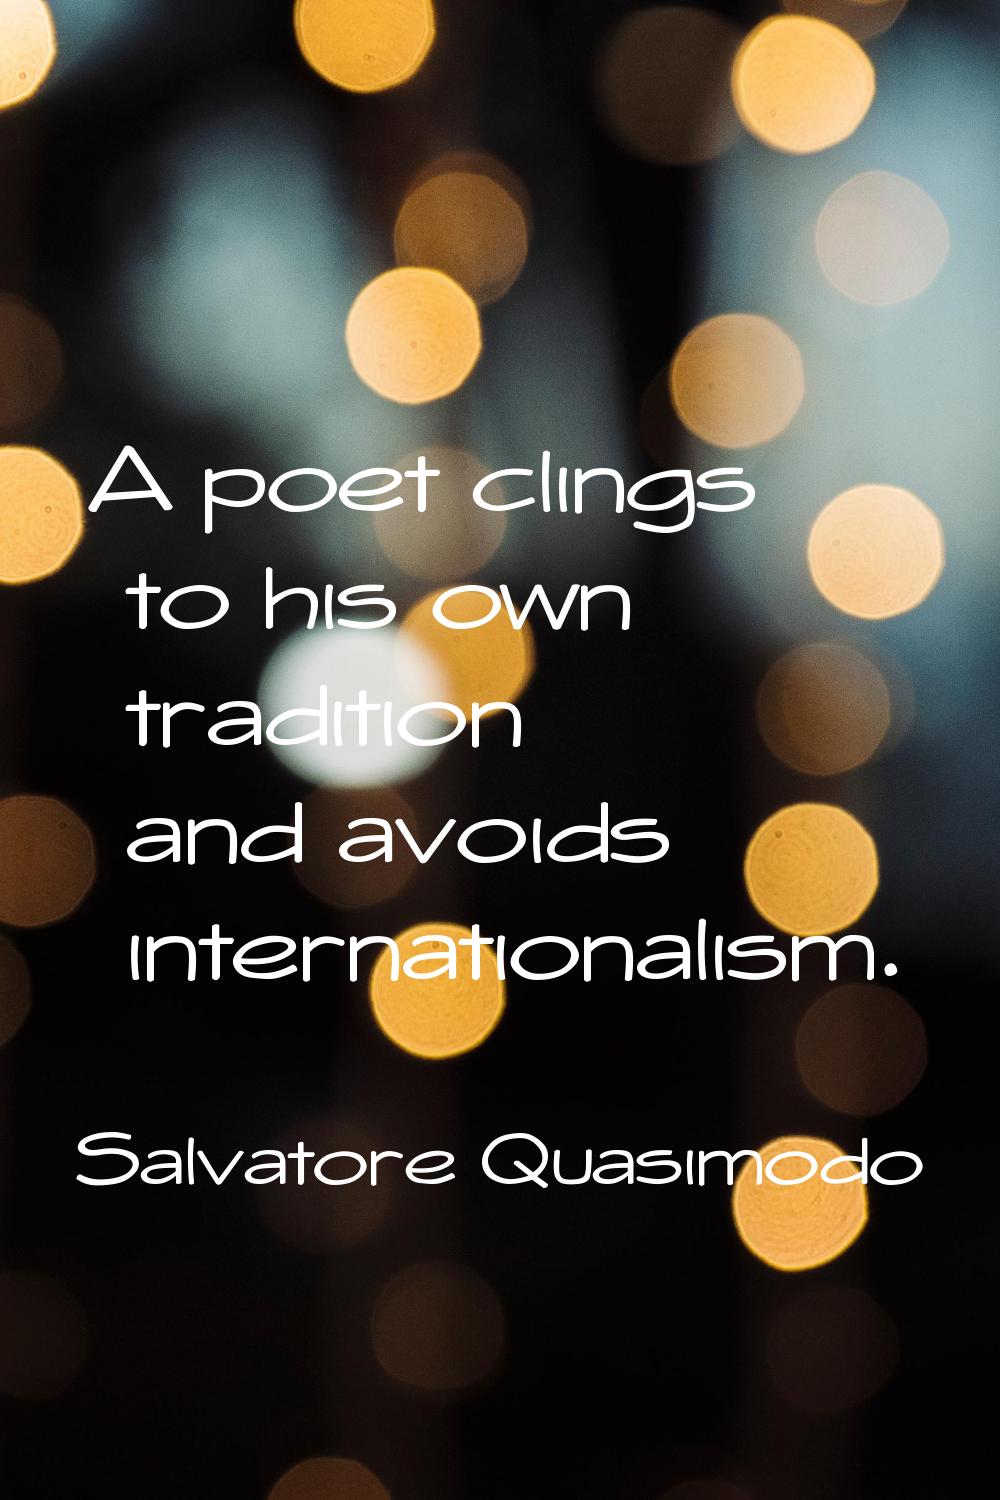 A poet clings to his own tradition and avoids internationalism.